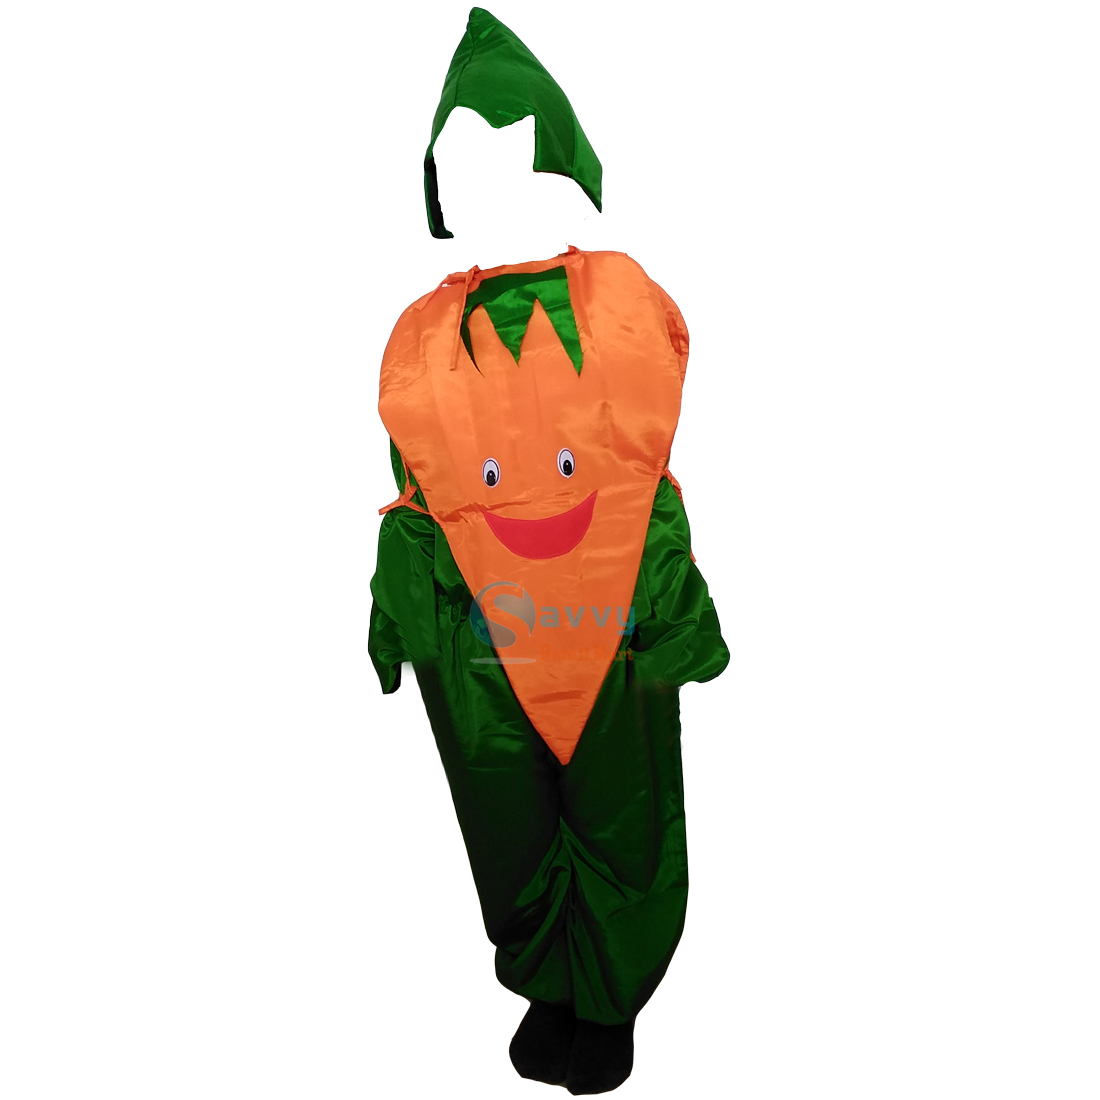 Peas and Carrots Costume Adult Funny Couples Halloween Fancy Dress | eBay